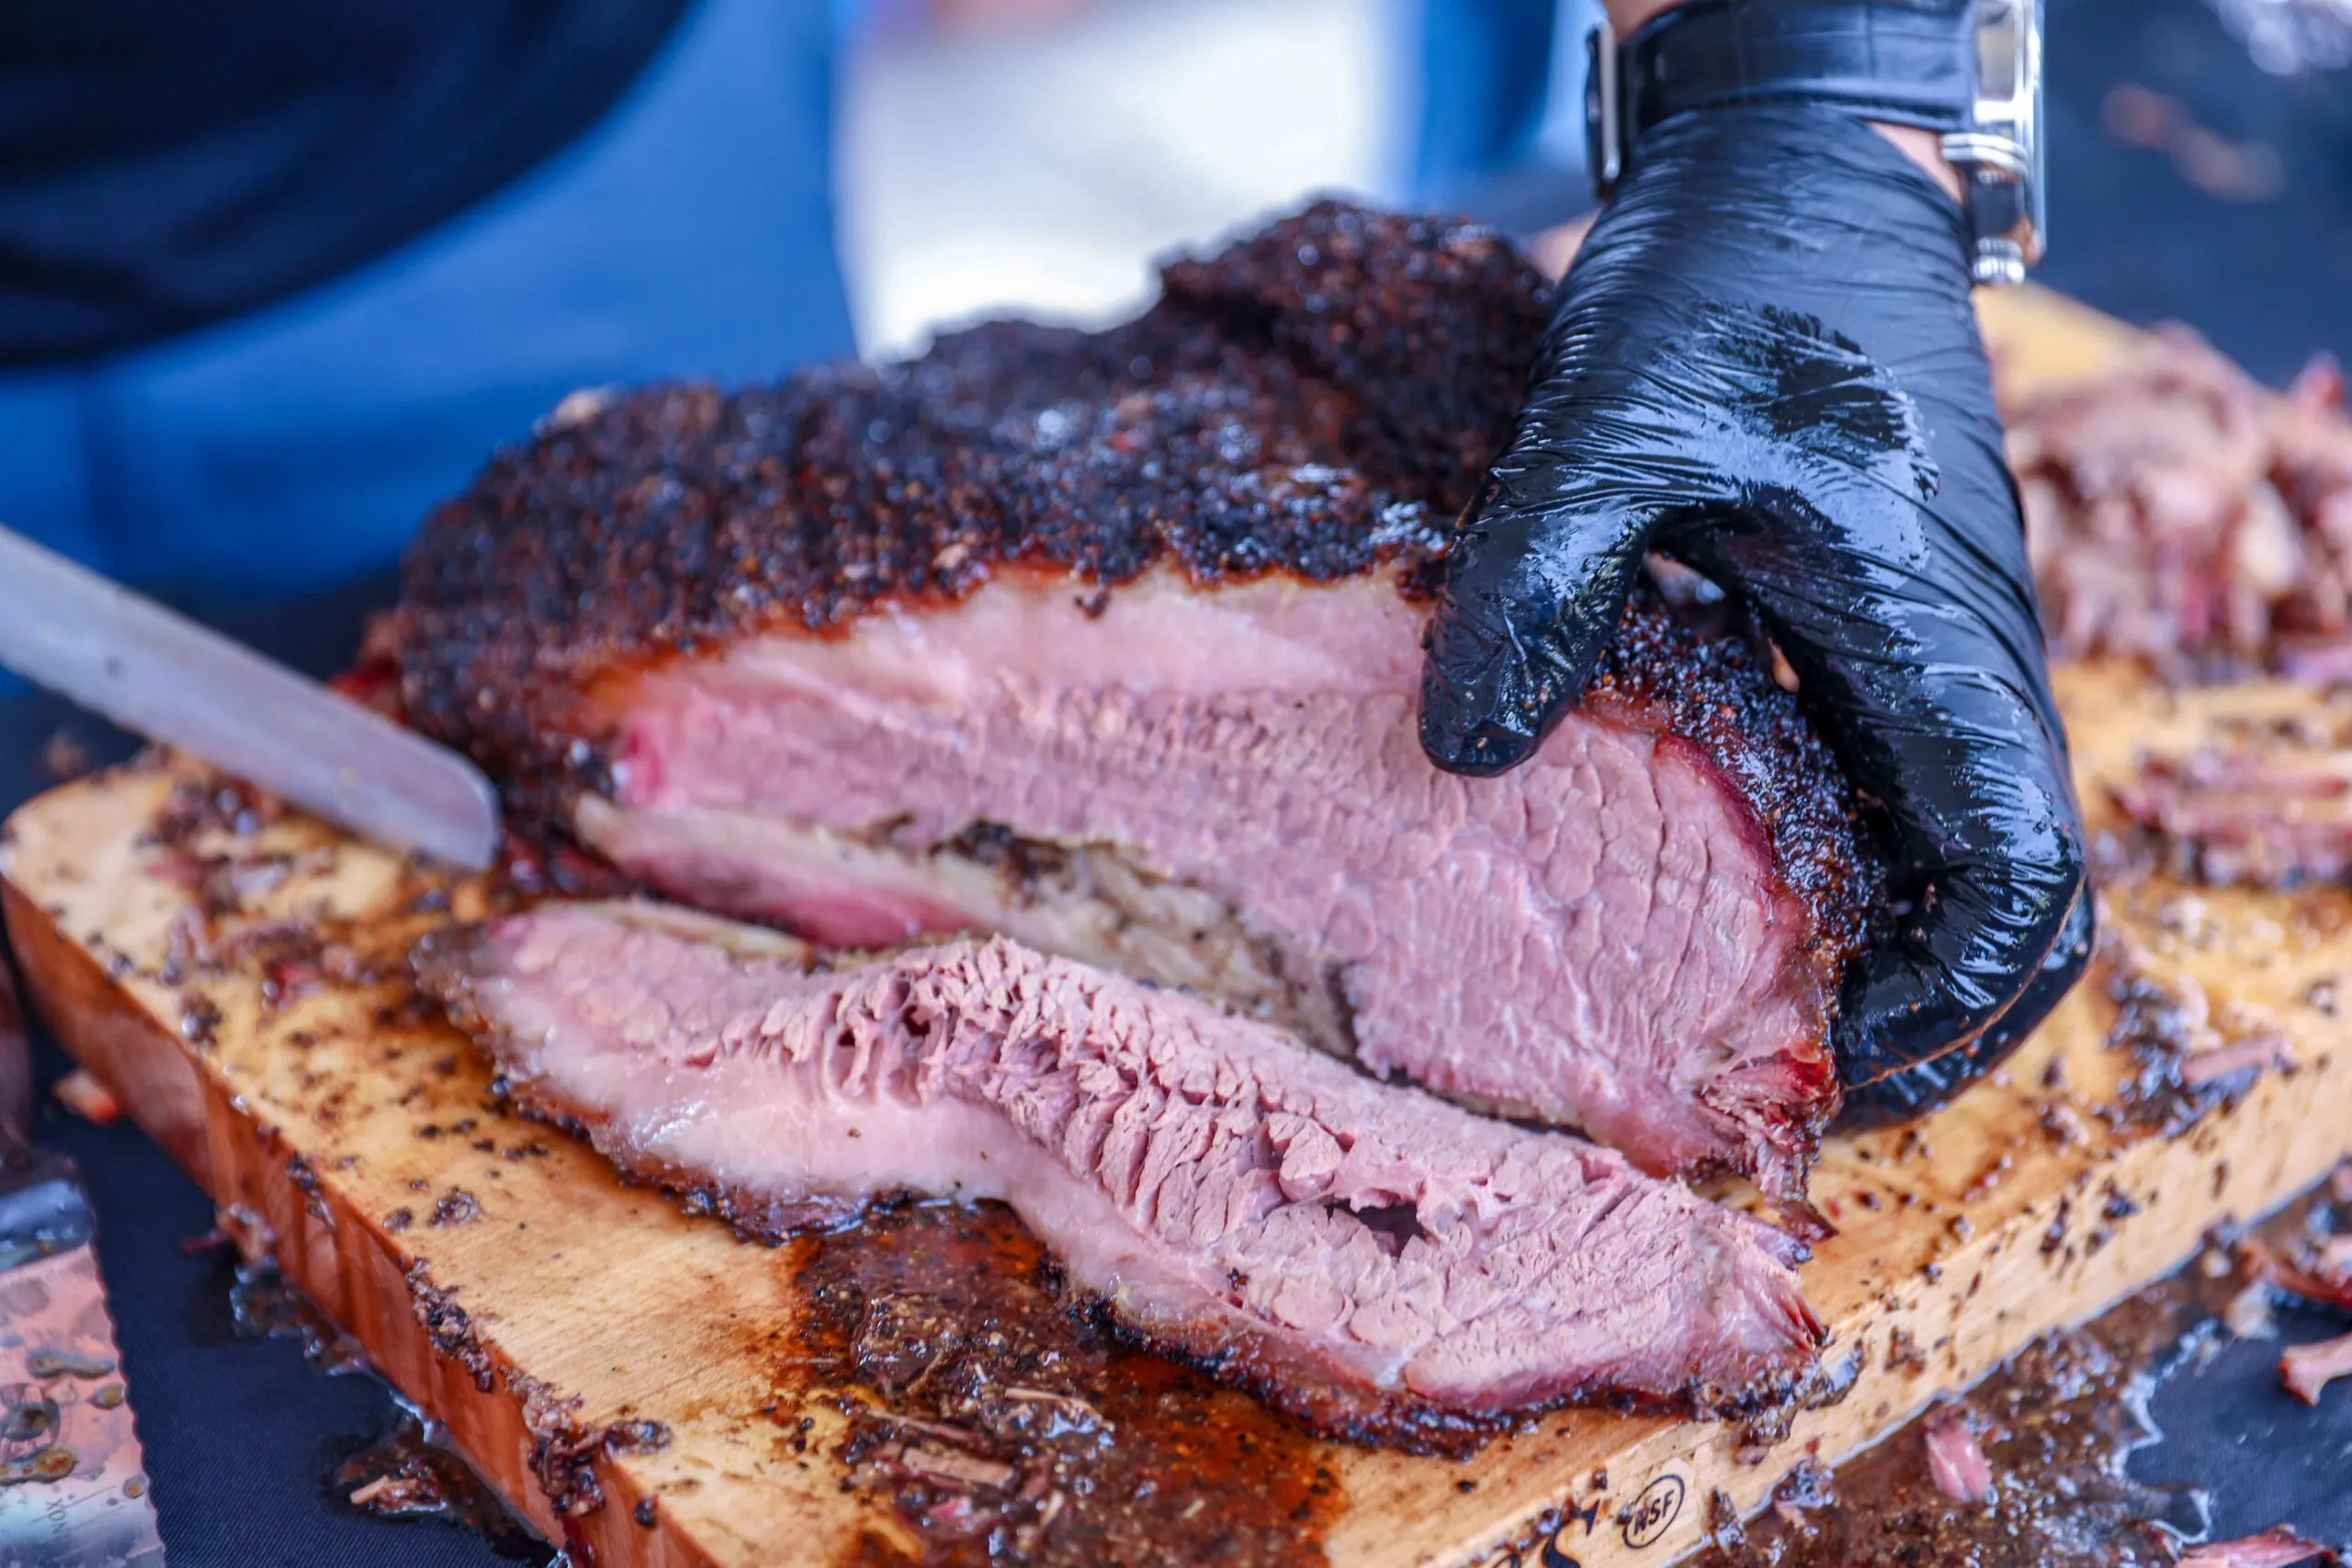 gloved hand slicing a smoked brisket showing the pink inside